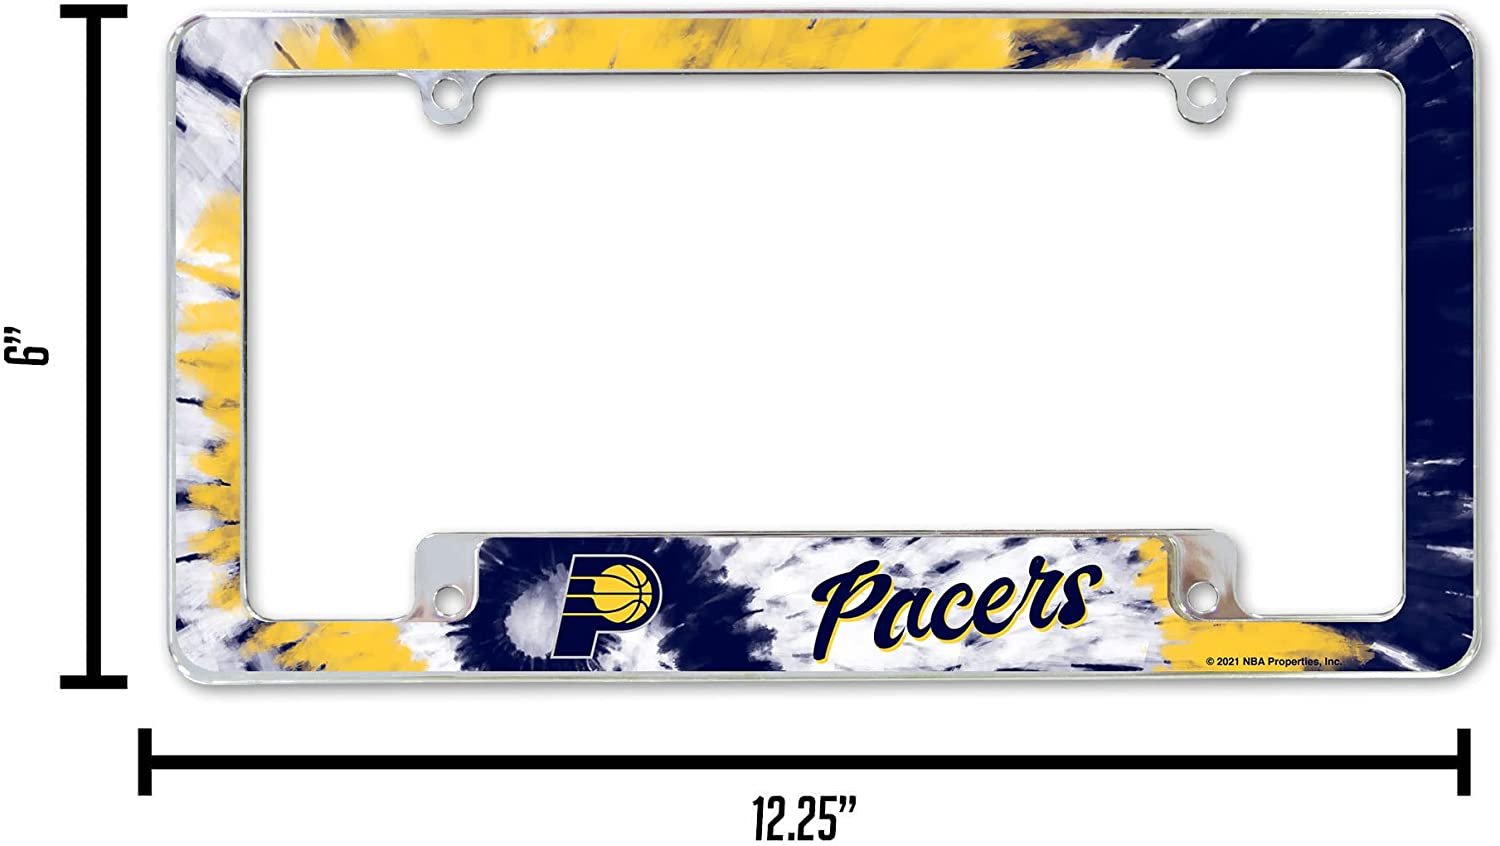 Indiana Pacers Metal License Plate Frame Chrome Tag Cover Tie Dye Design 6x12 Inch